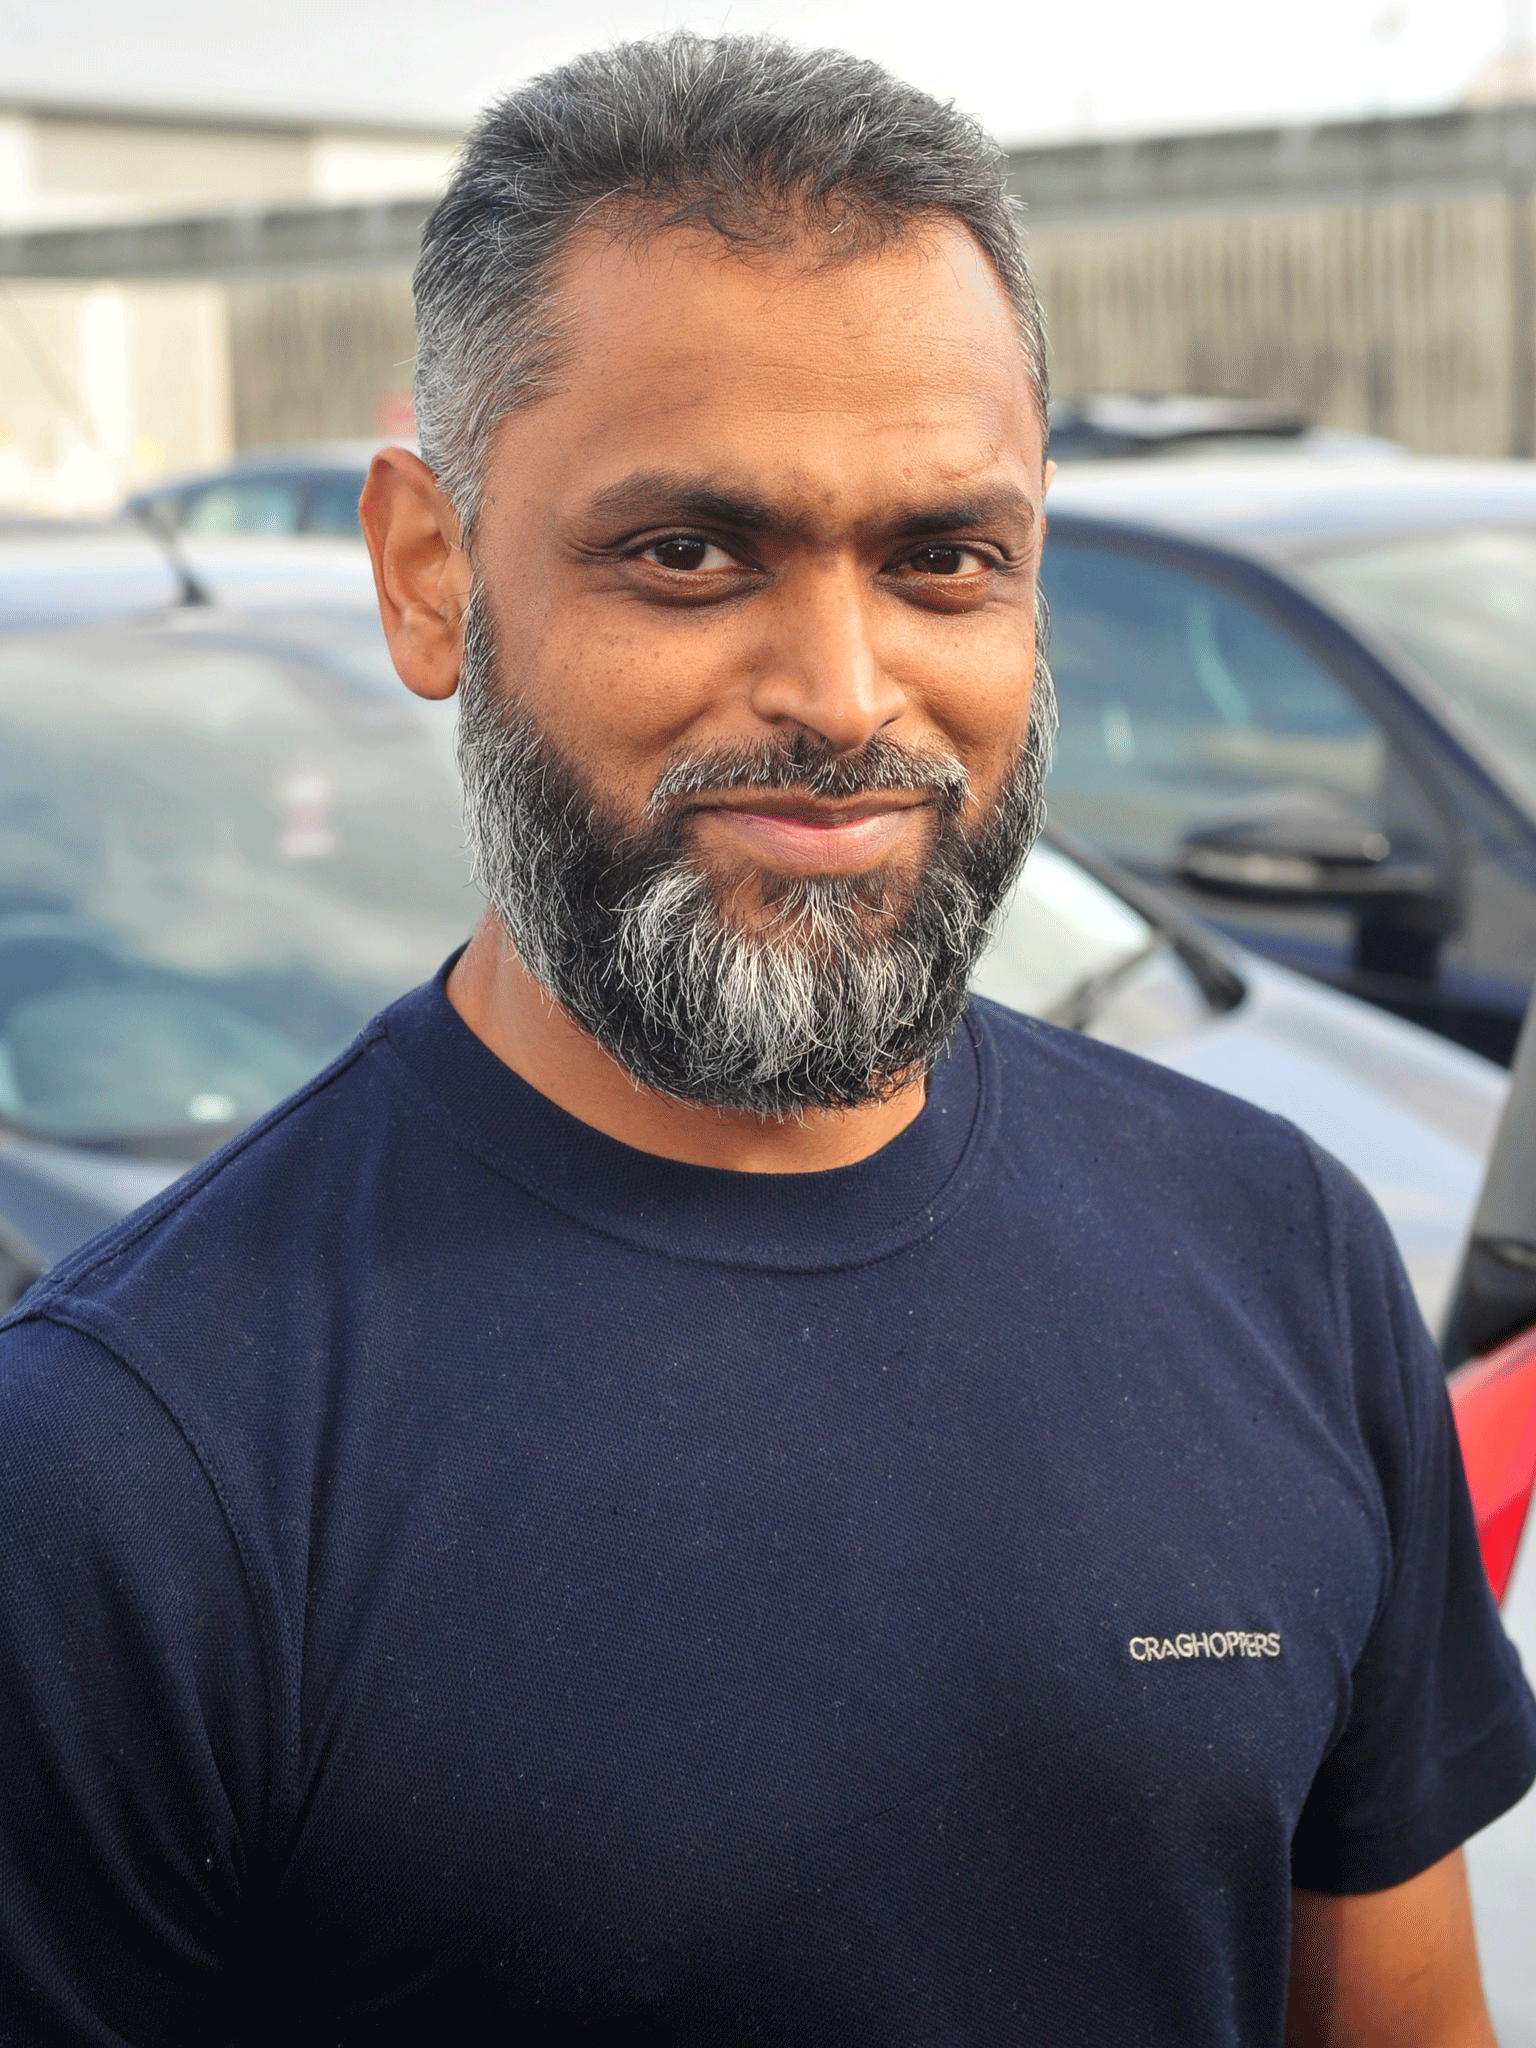 Moazzam Begg, a former Guantanamo Bay detainee, has claimed he offered to intervene and help free British hostage Alan Henning from Isis militants